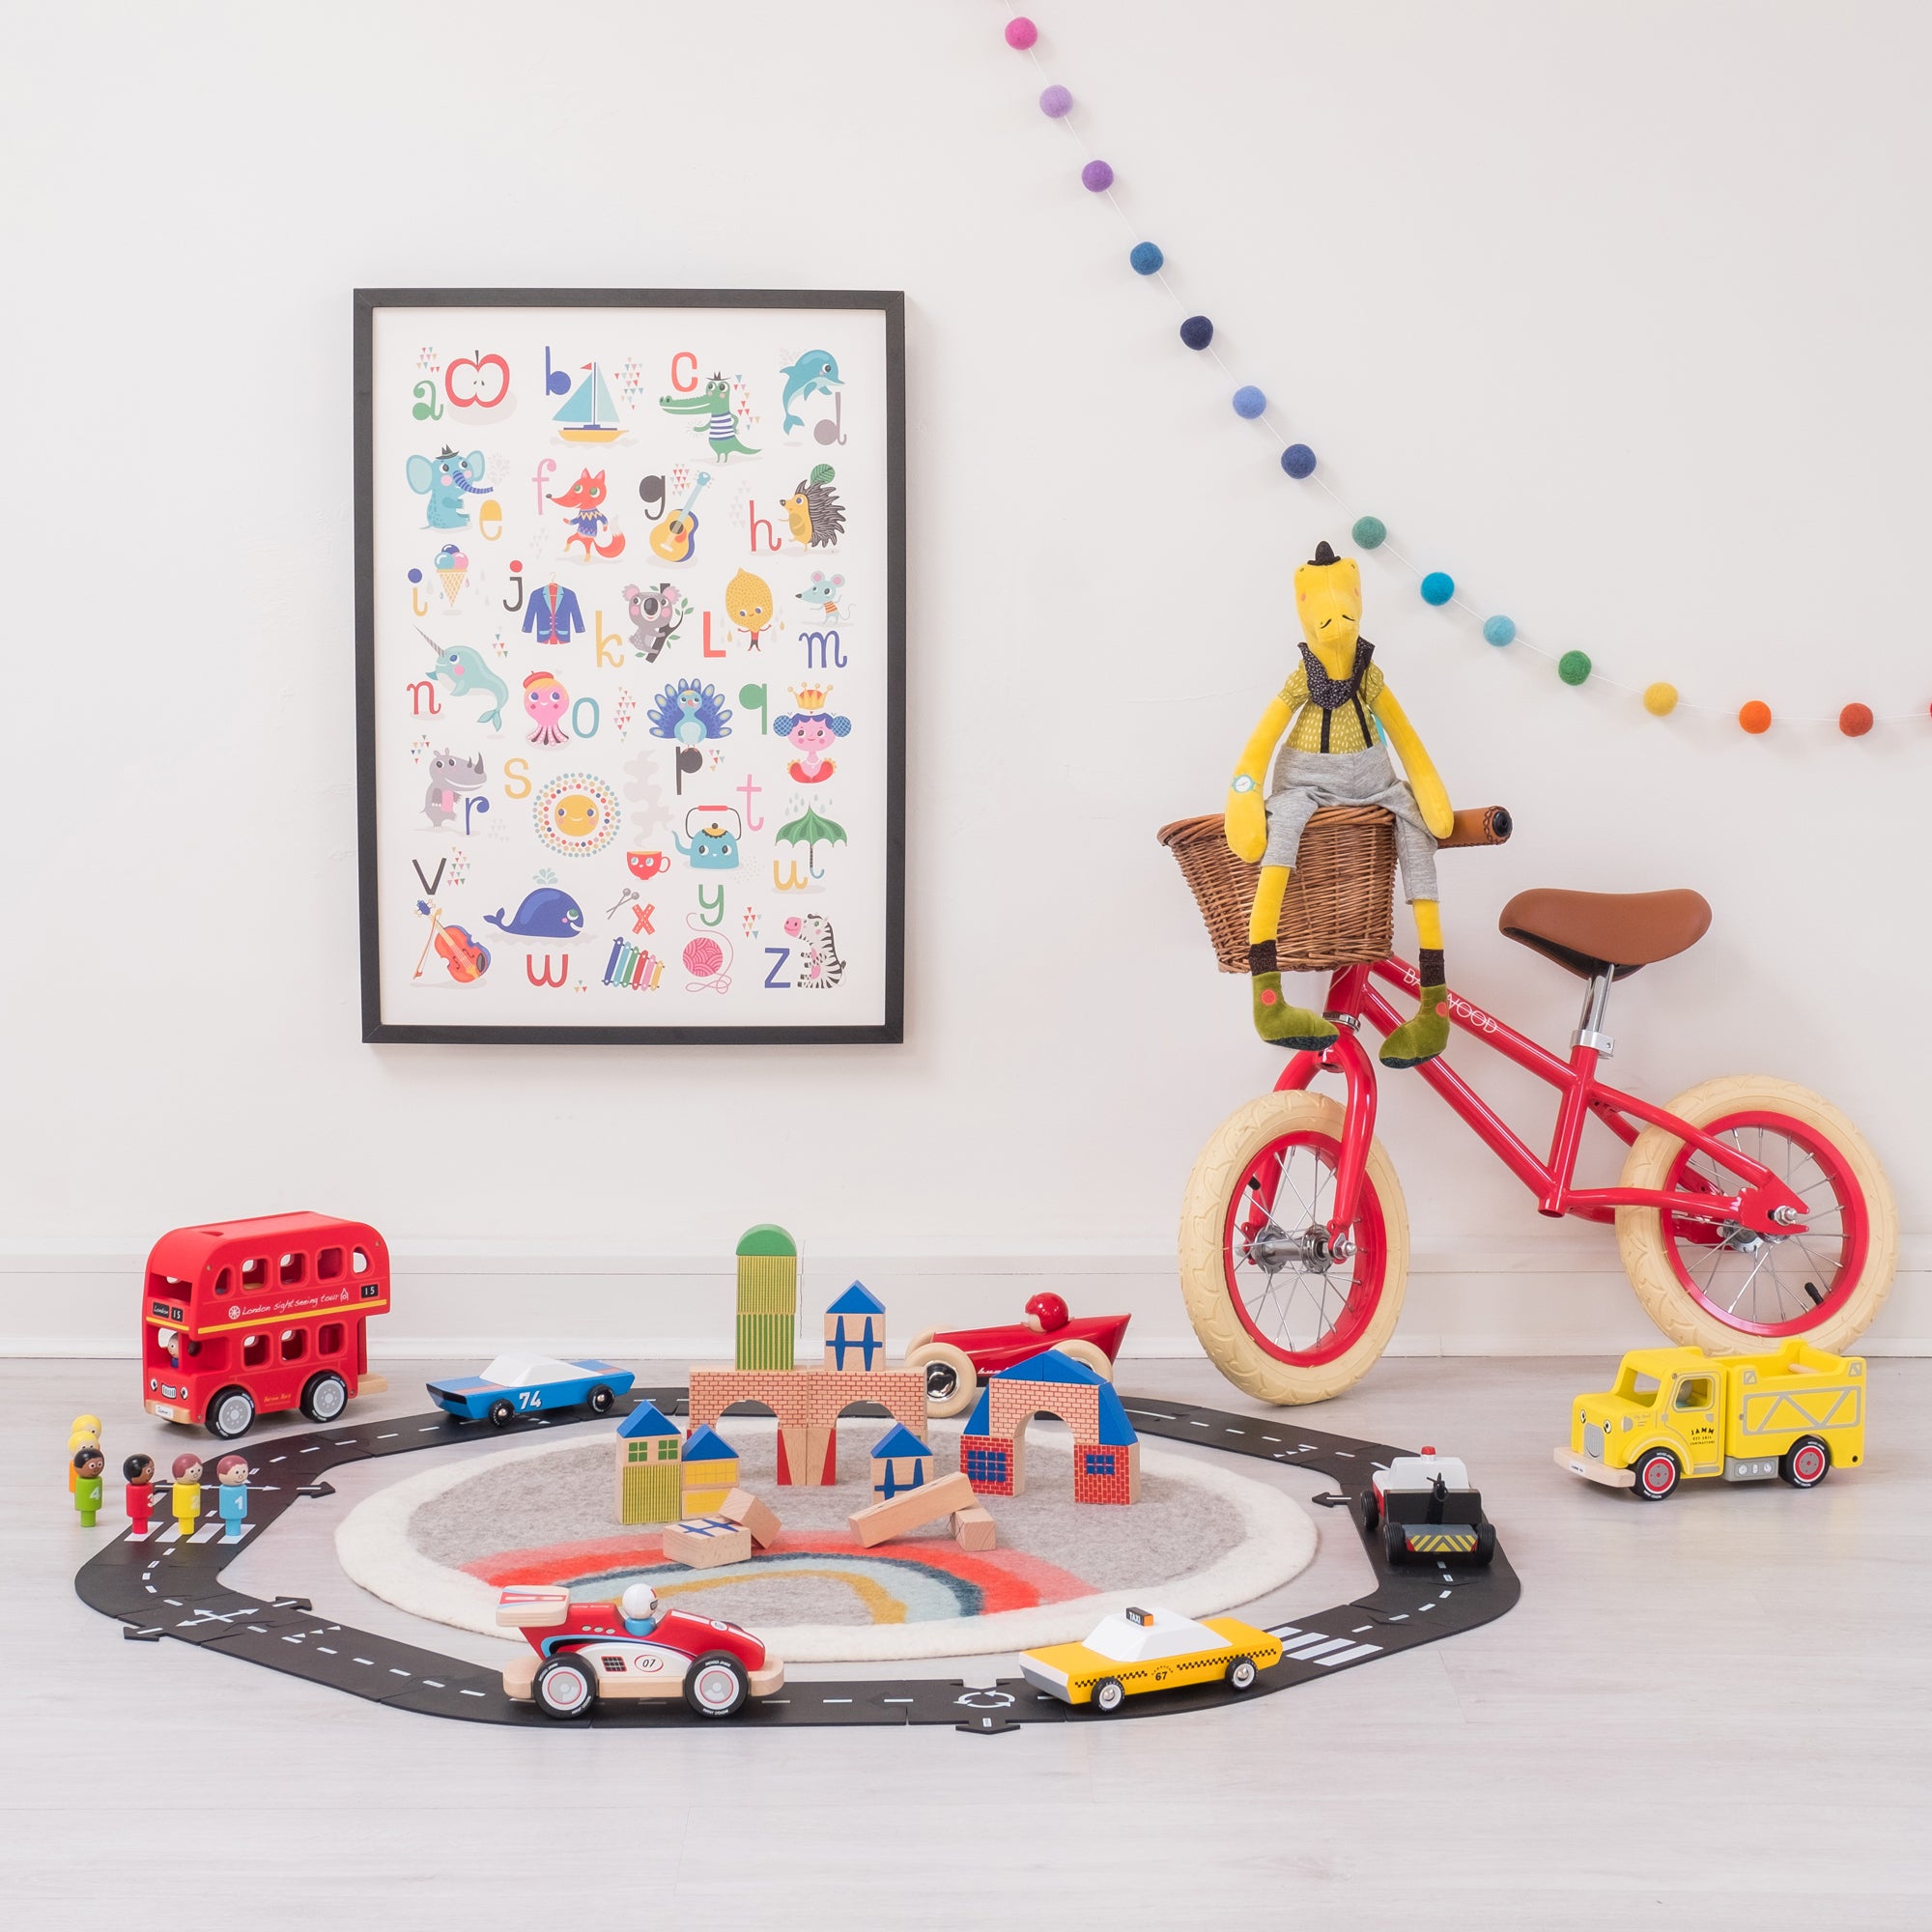 Toys and children's bedroom accessories, available at Bobby Rabbit.